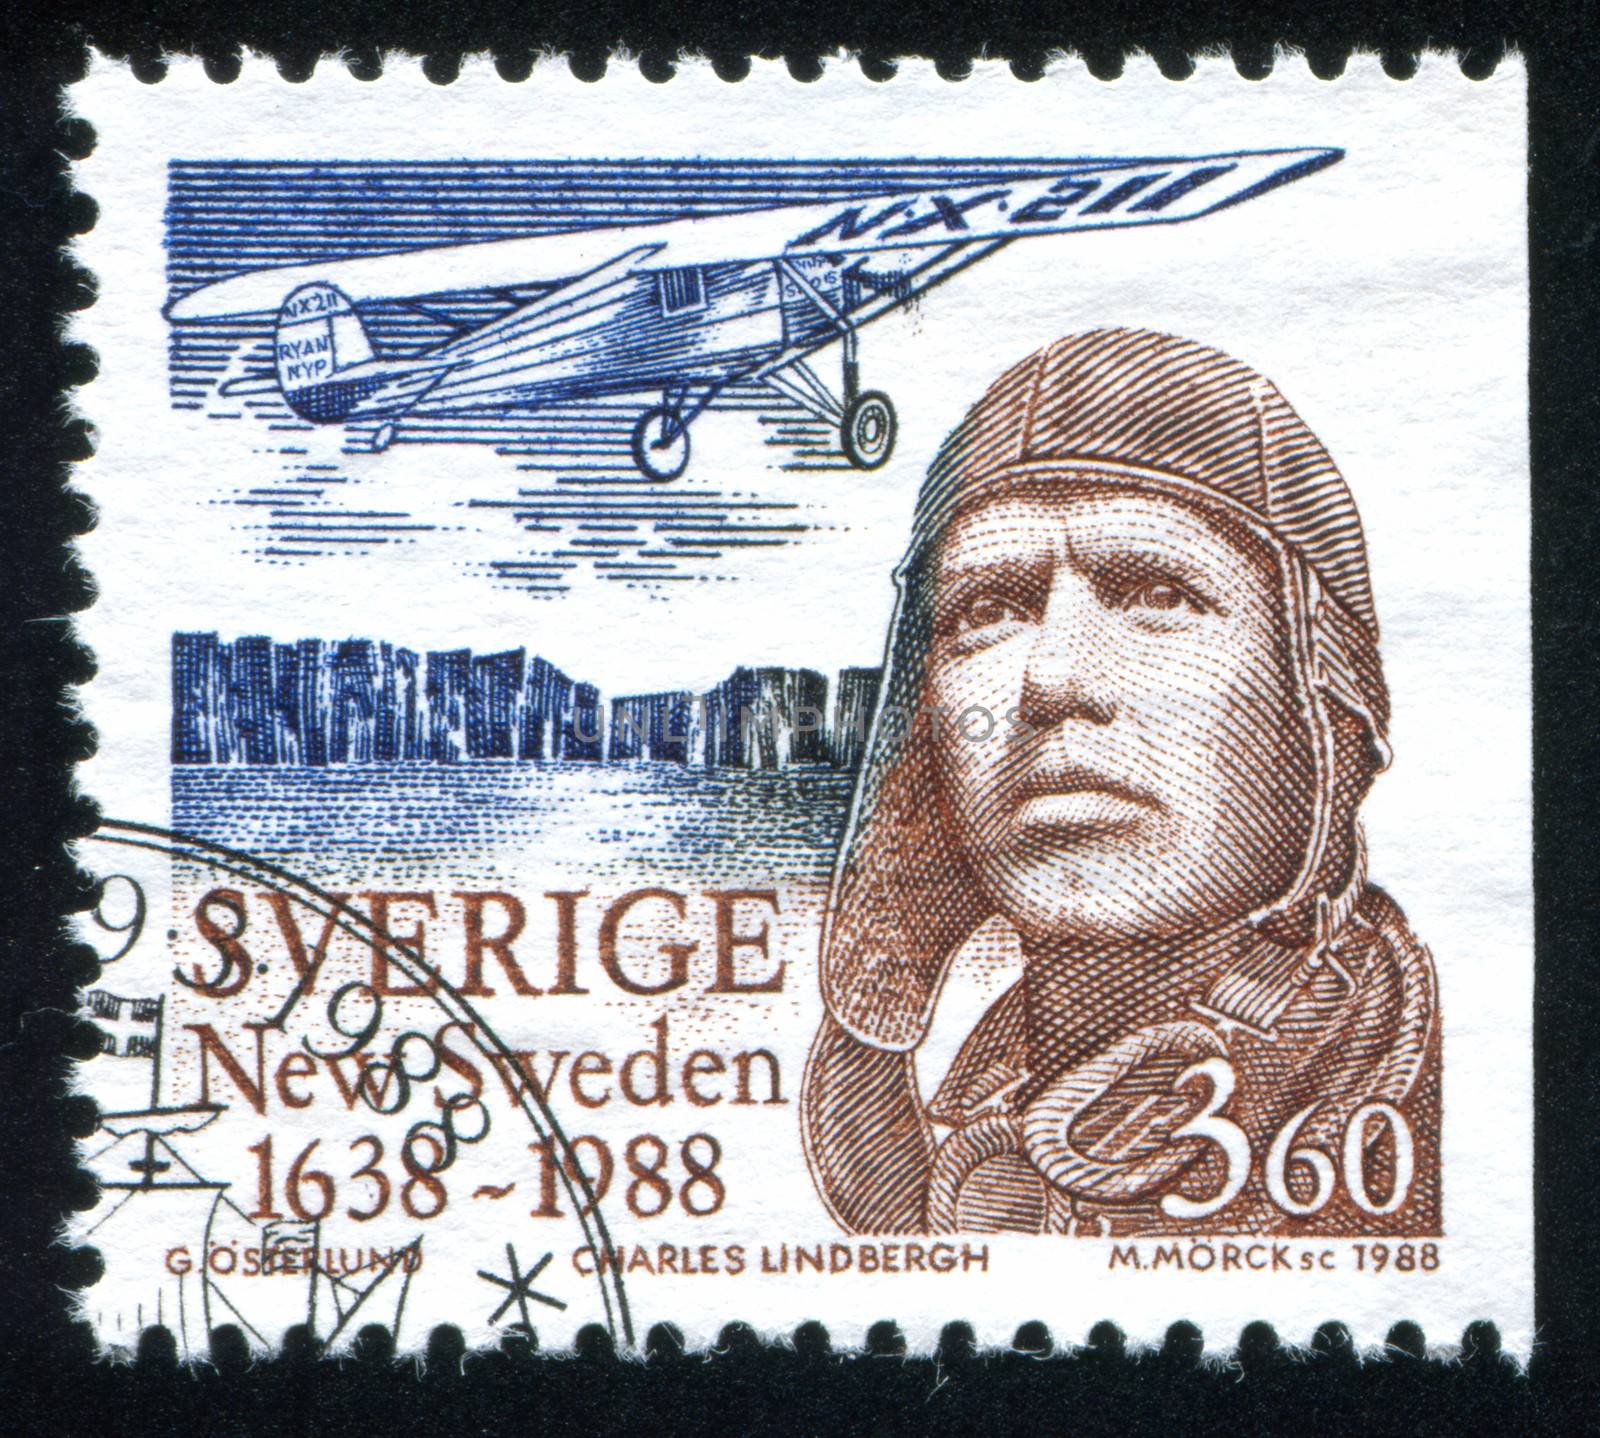 SWEDEN - CIRCA 1988: stamp printed by Sweden, shows Charles Lindbergh and The Spirit of St. Louis, circa 1988